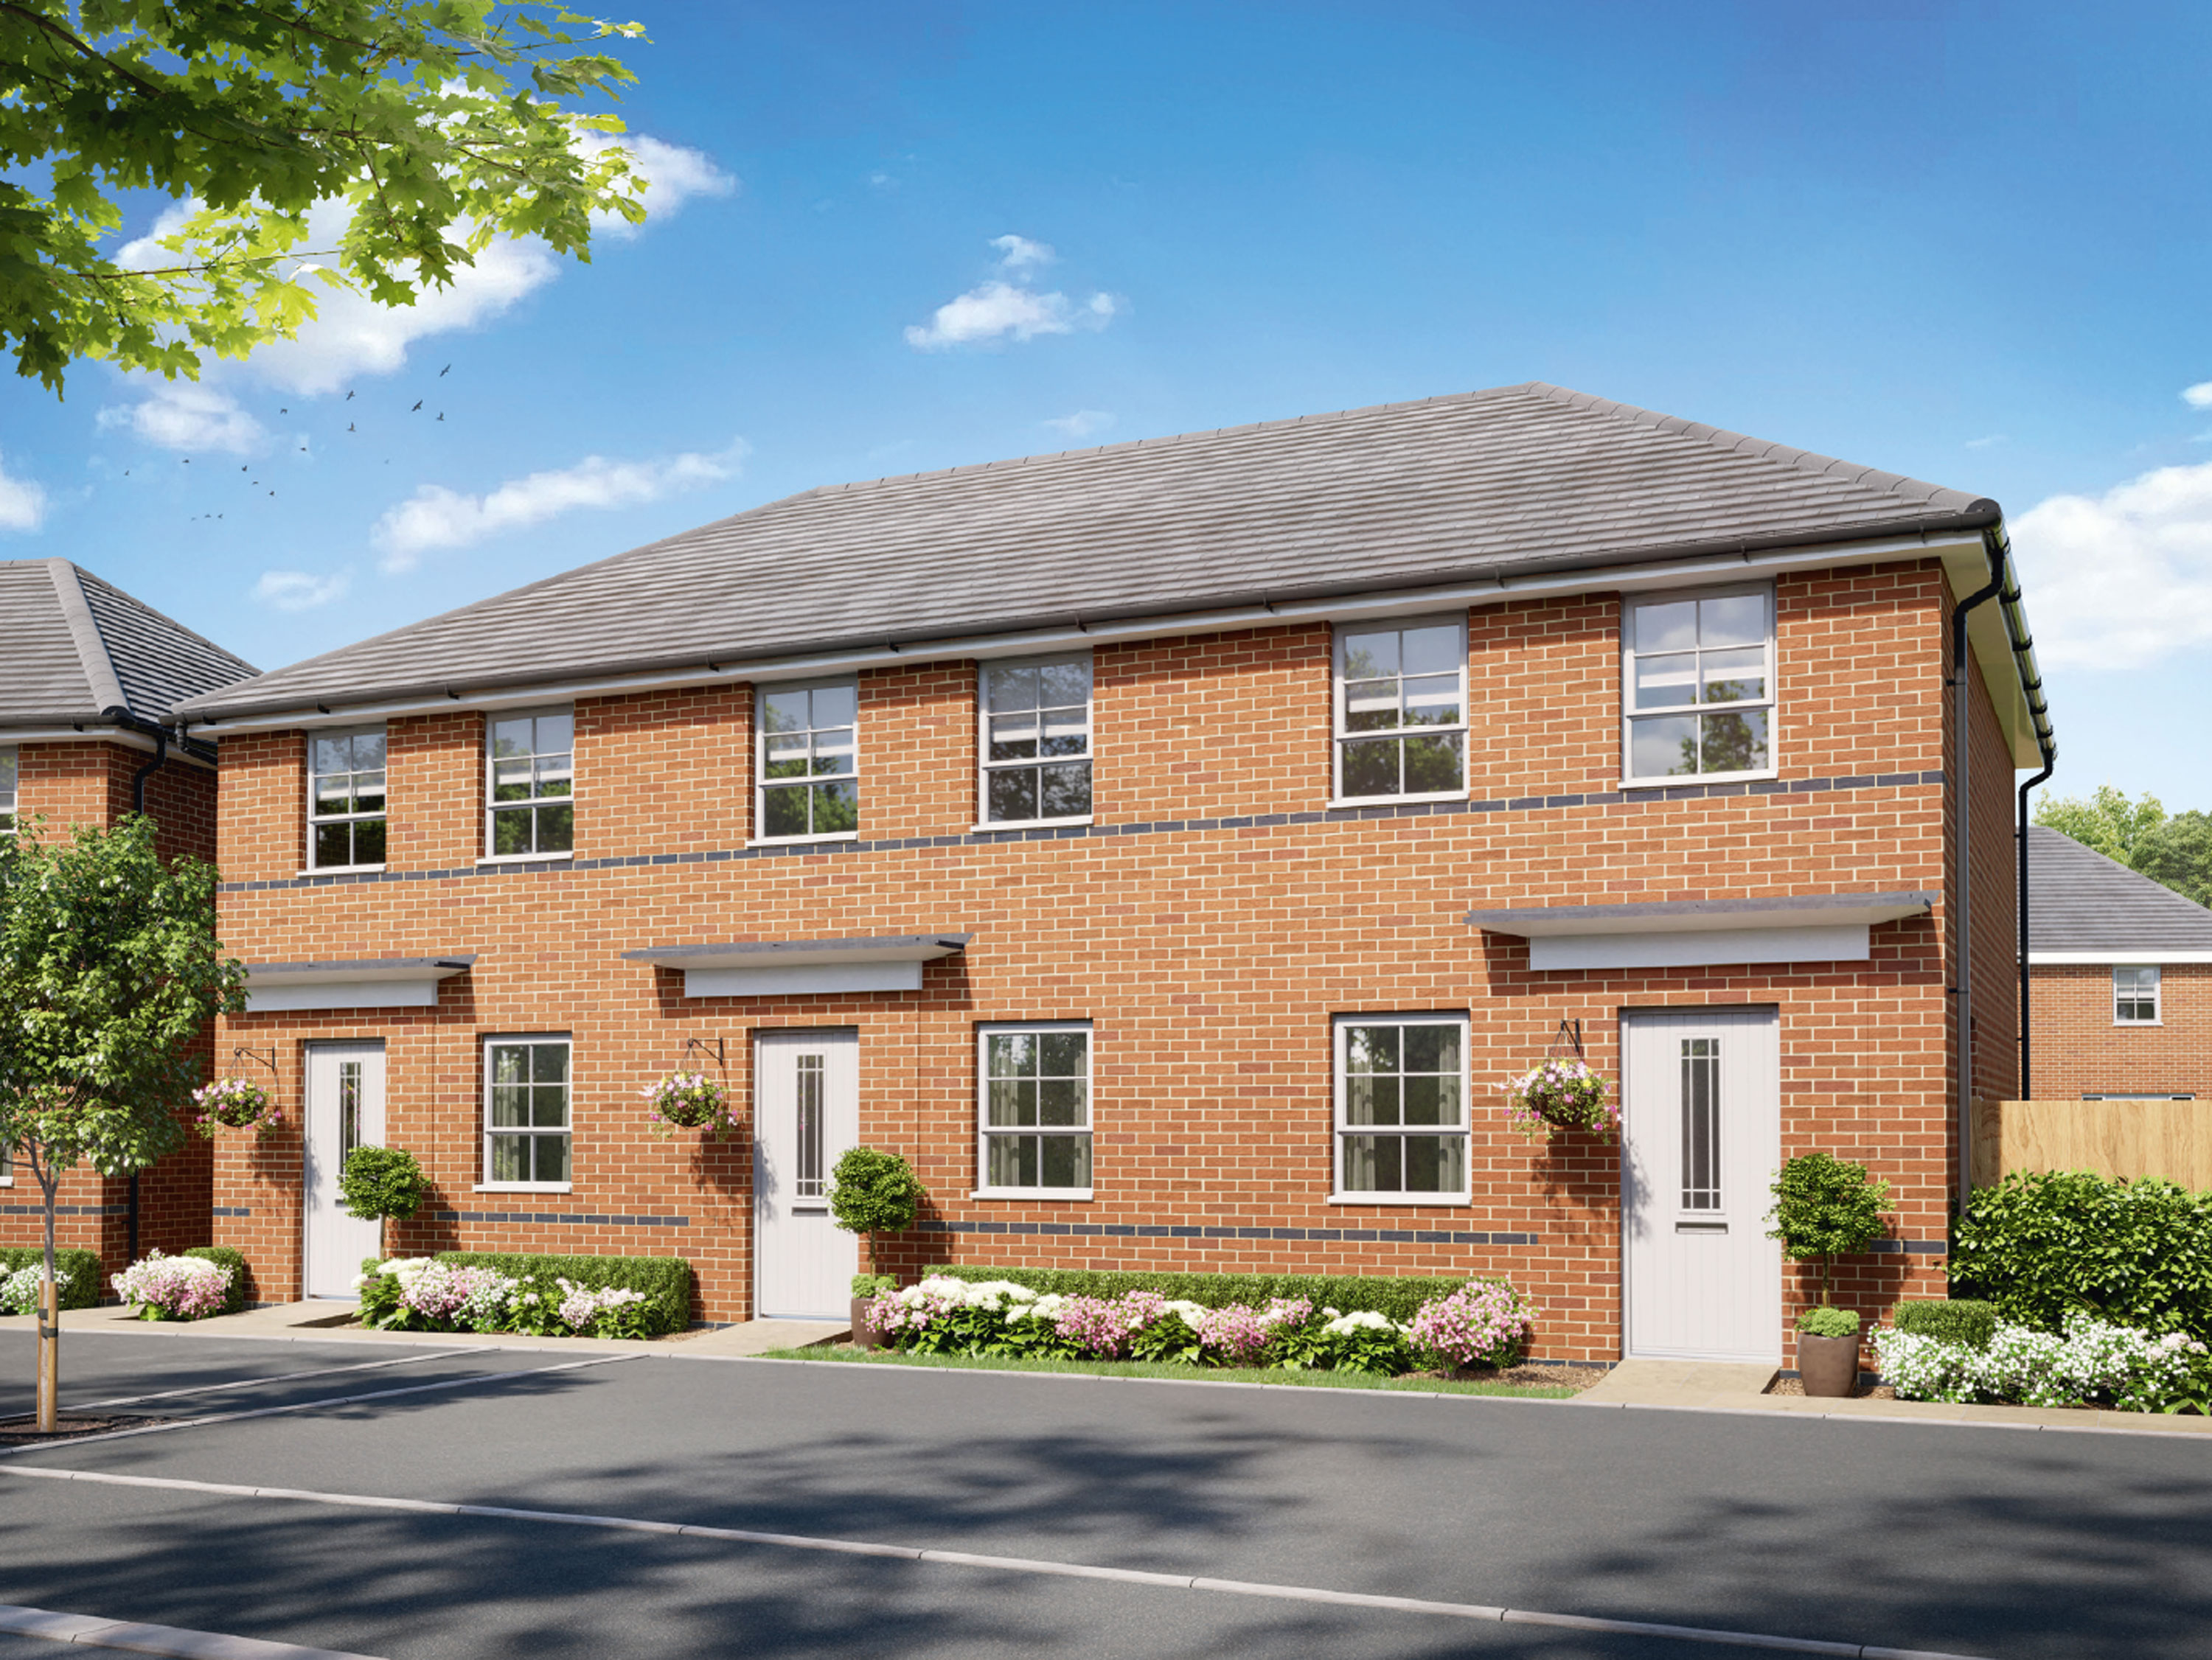 Property 1 of 8. Exterior CGI Of Our 2 Bed Denford Home